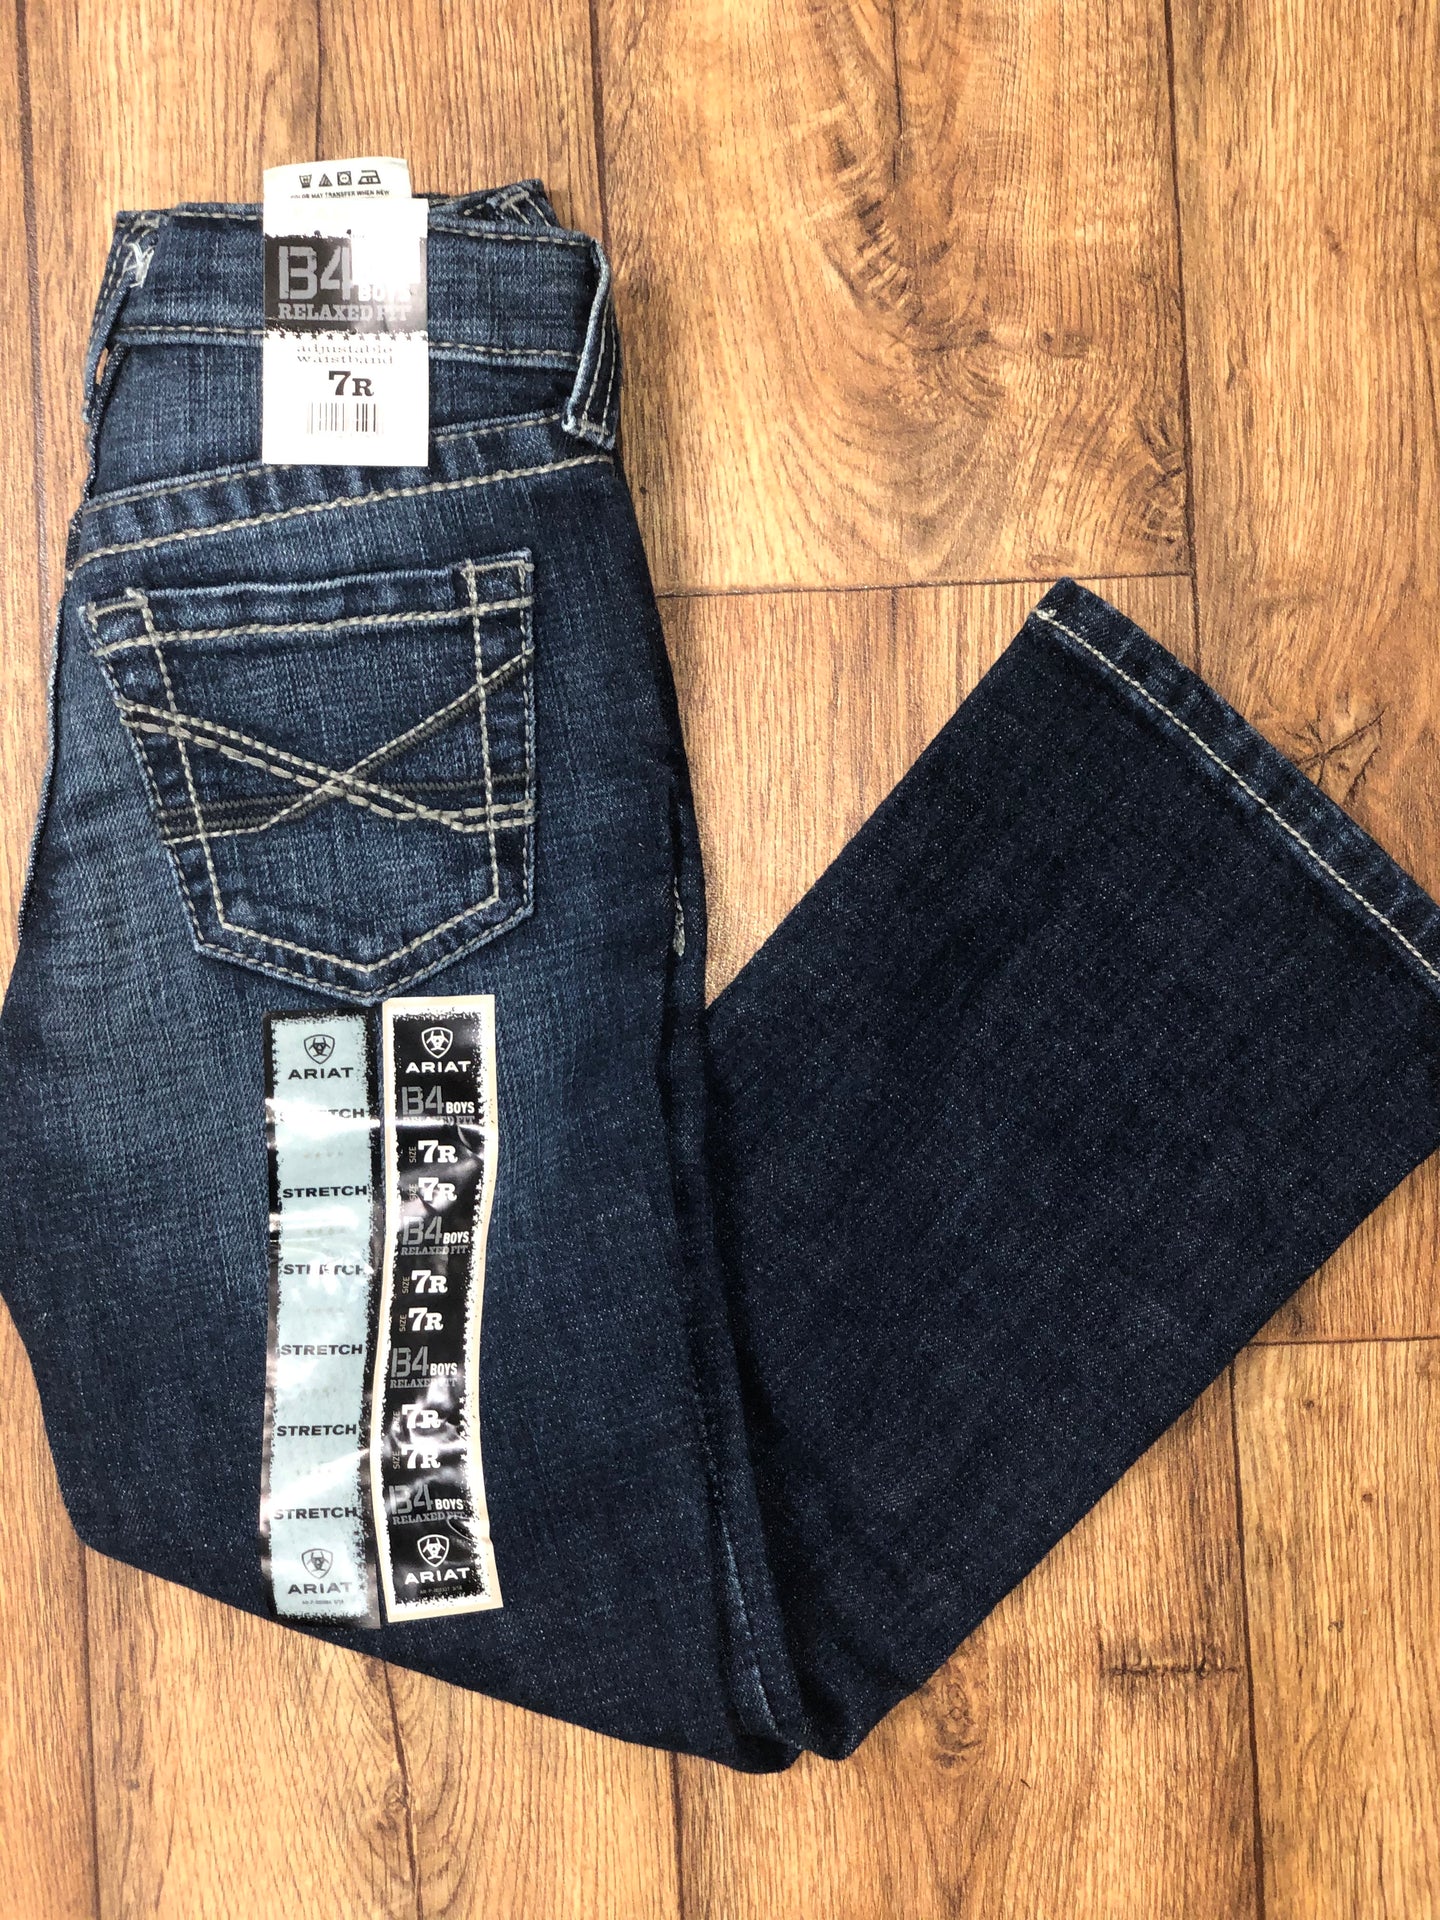 Ariat B4 Relaxed Fit Boys Jeans (2331)